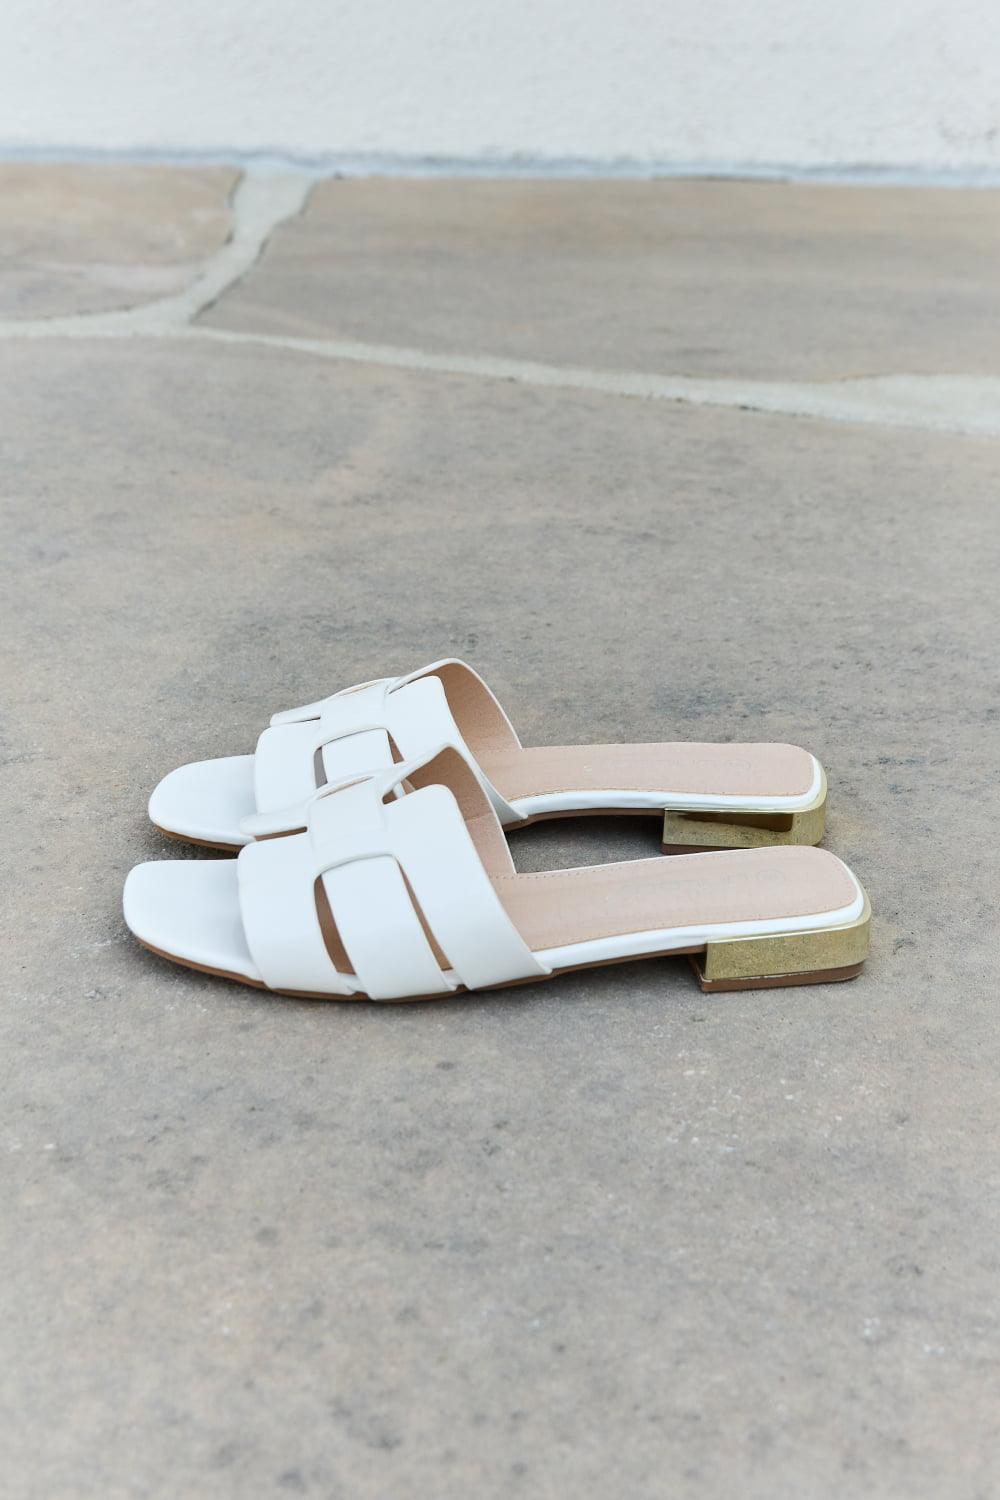 Walk It Out Slide Sandals in Icy White - SAVLUXE